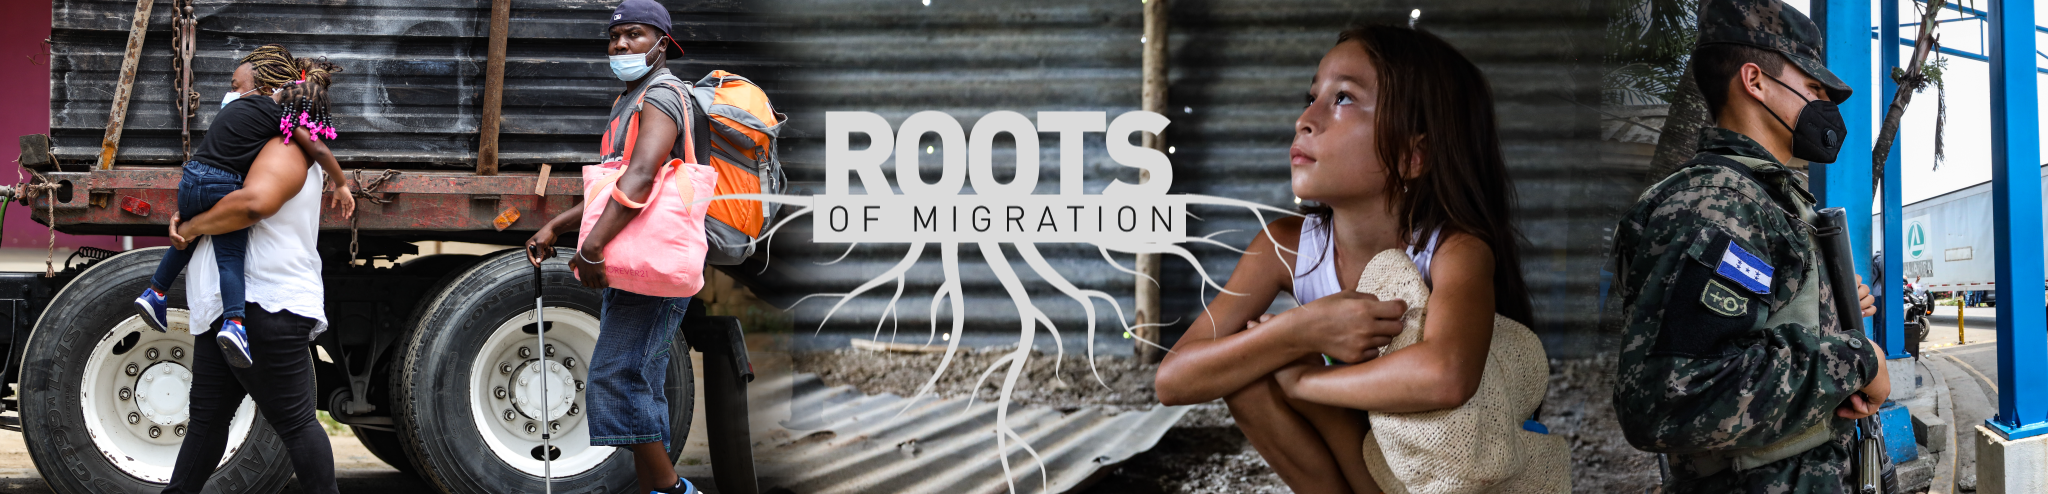 Roots of Migration